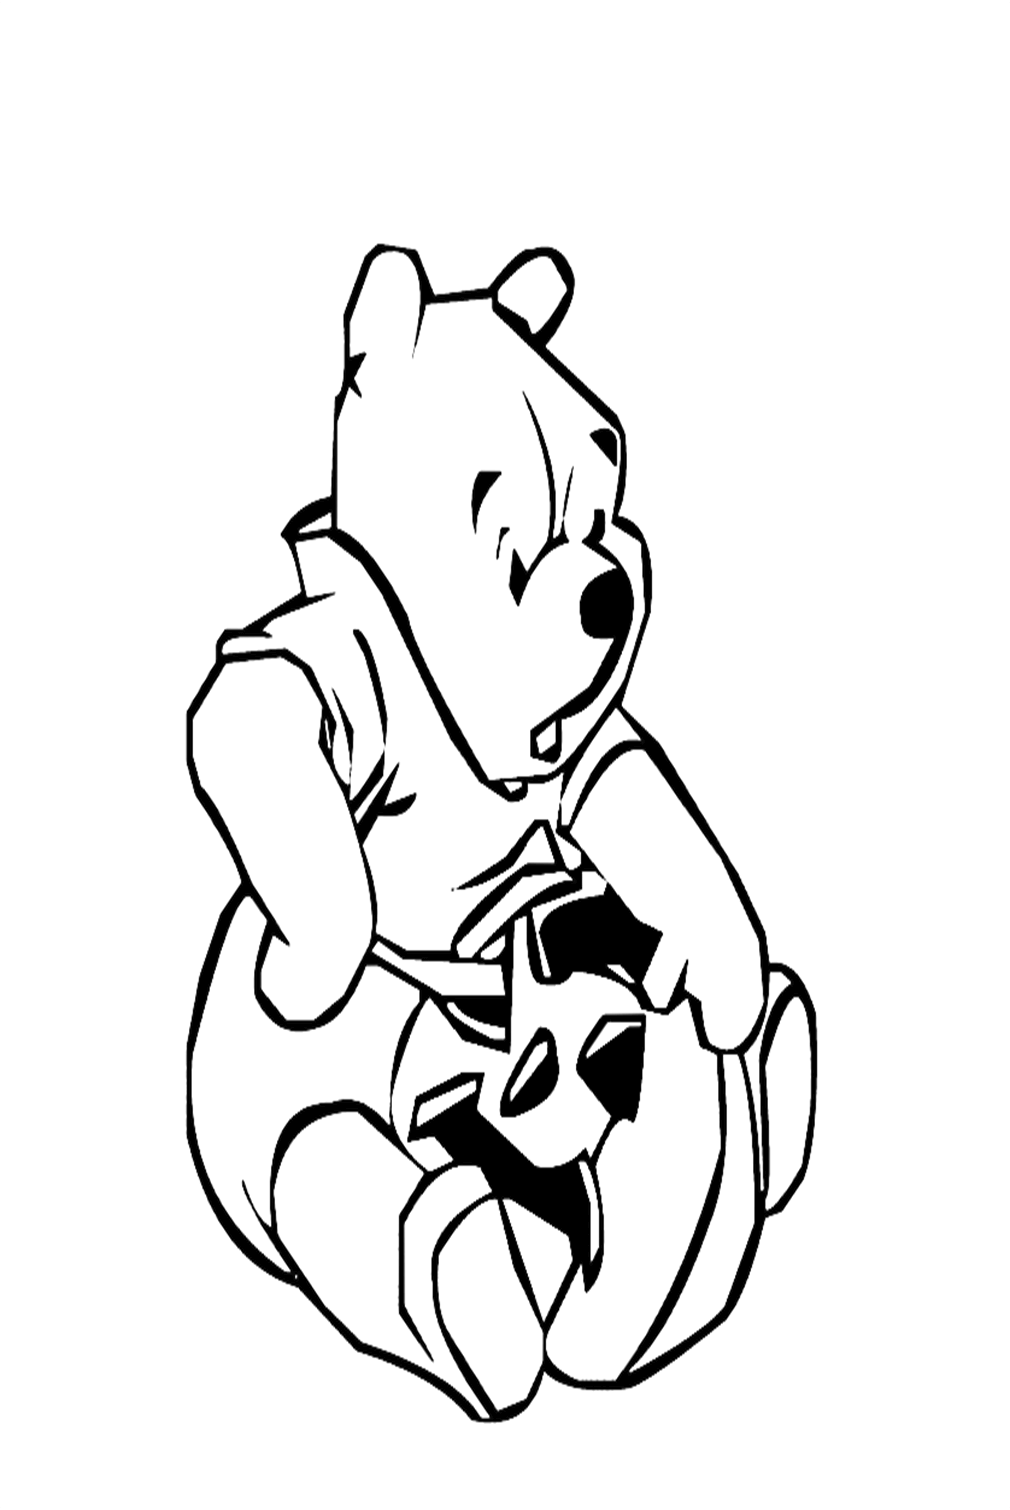 Pooh Carving Halloween Pumpkin Coloring Pages